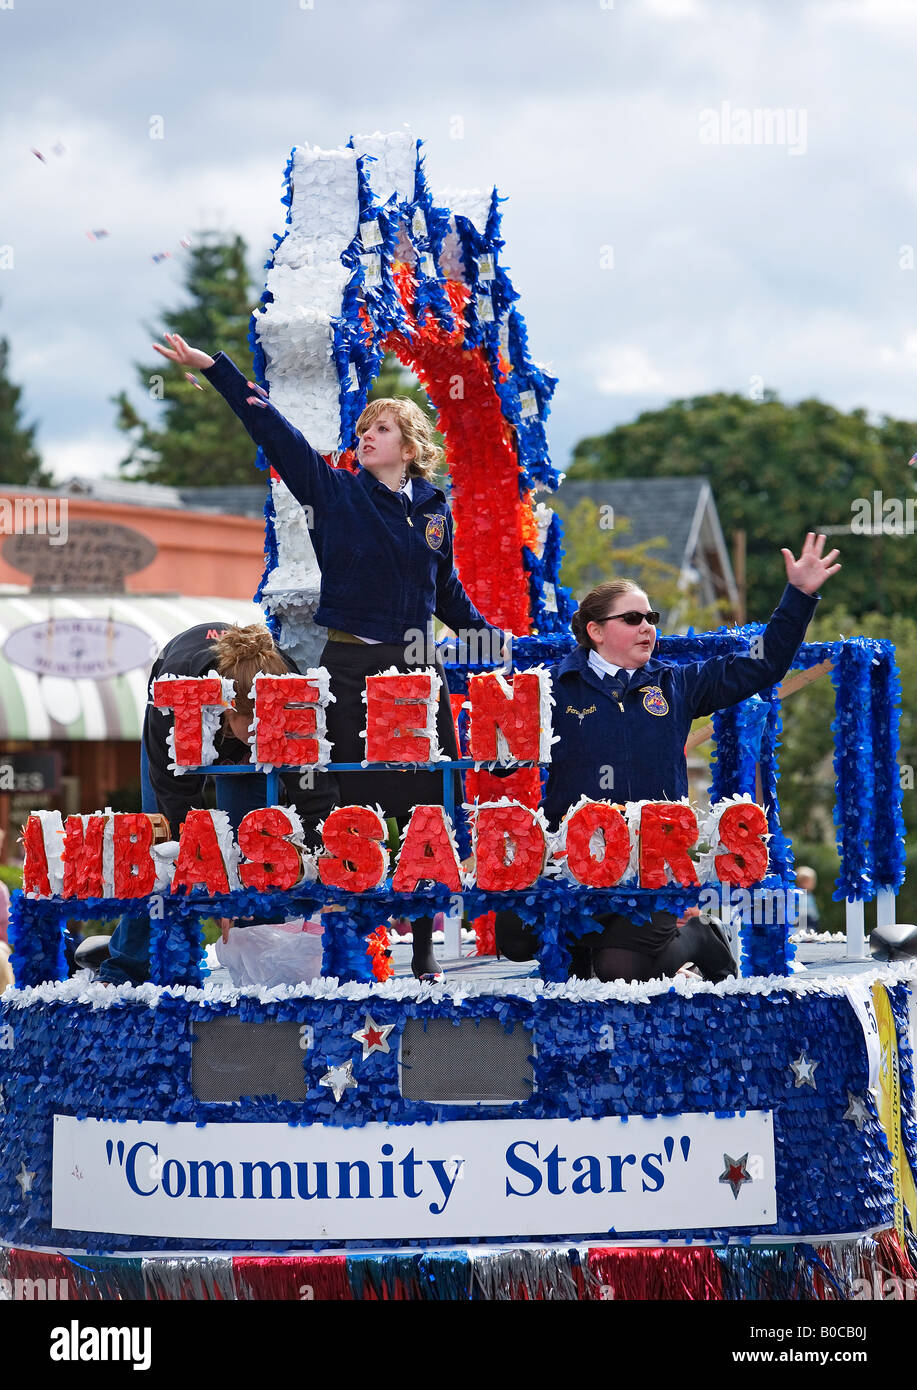 Image of Two teenage girls dressed in Future Farmers of America uniforms throwing candies in a parade Stock Photo